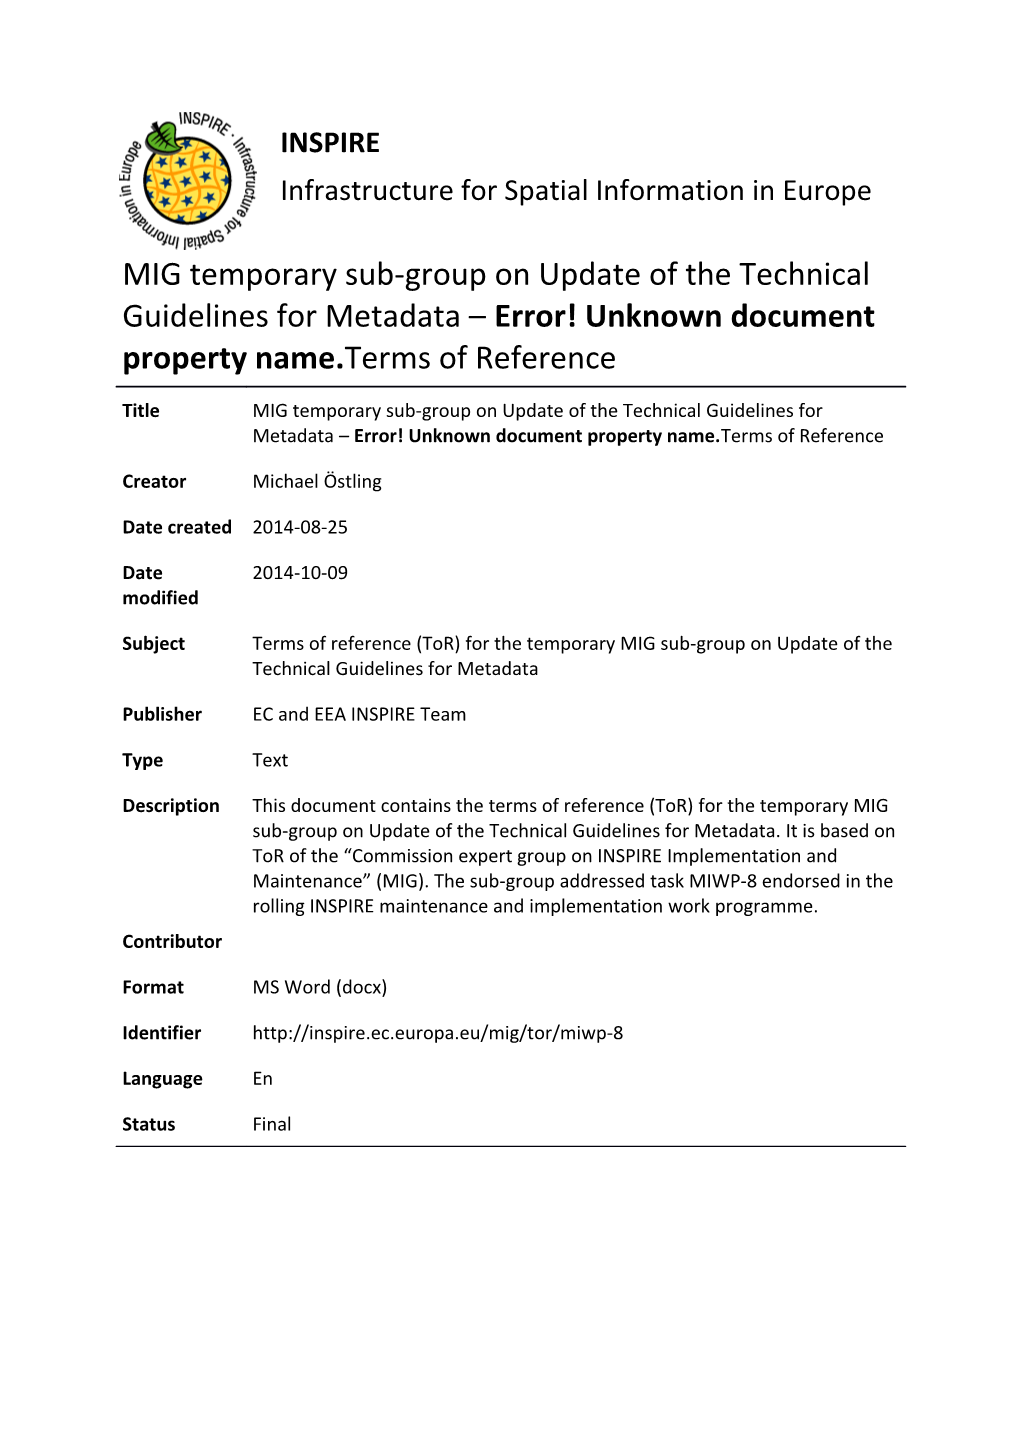 MIG Temporary Sub-Group (MIWG-8) on Update TG Metadata- Terms of Reference